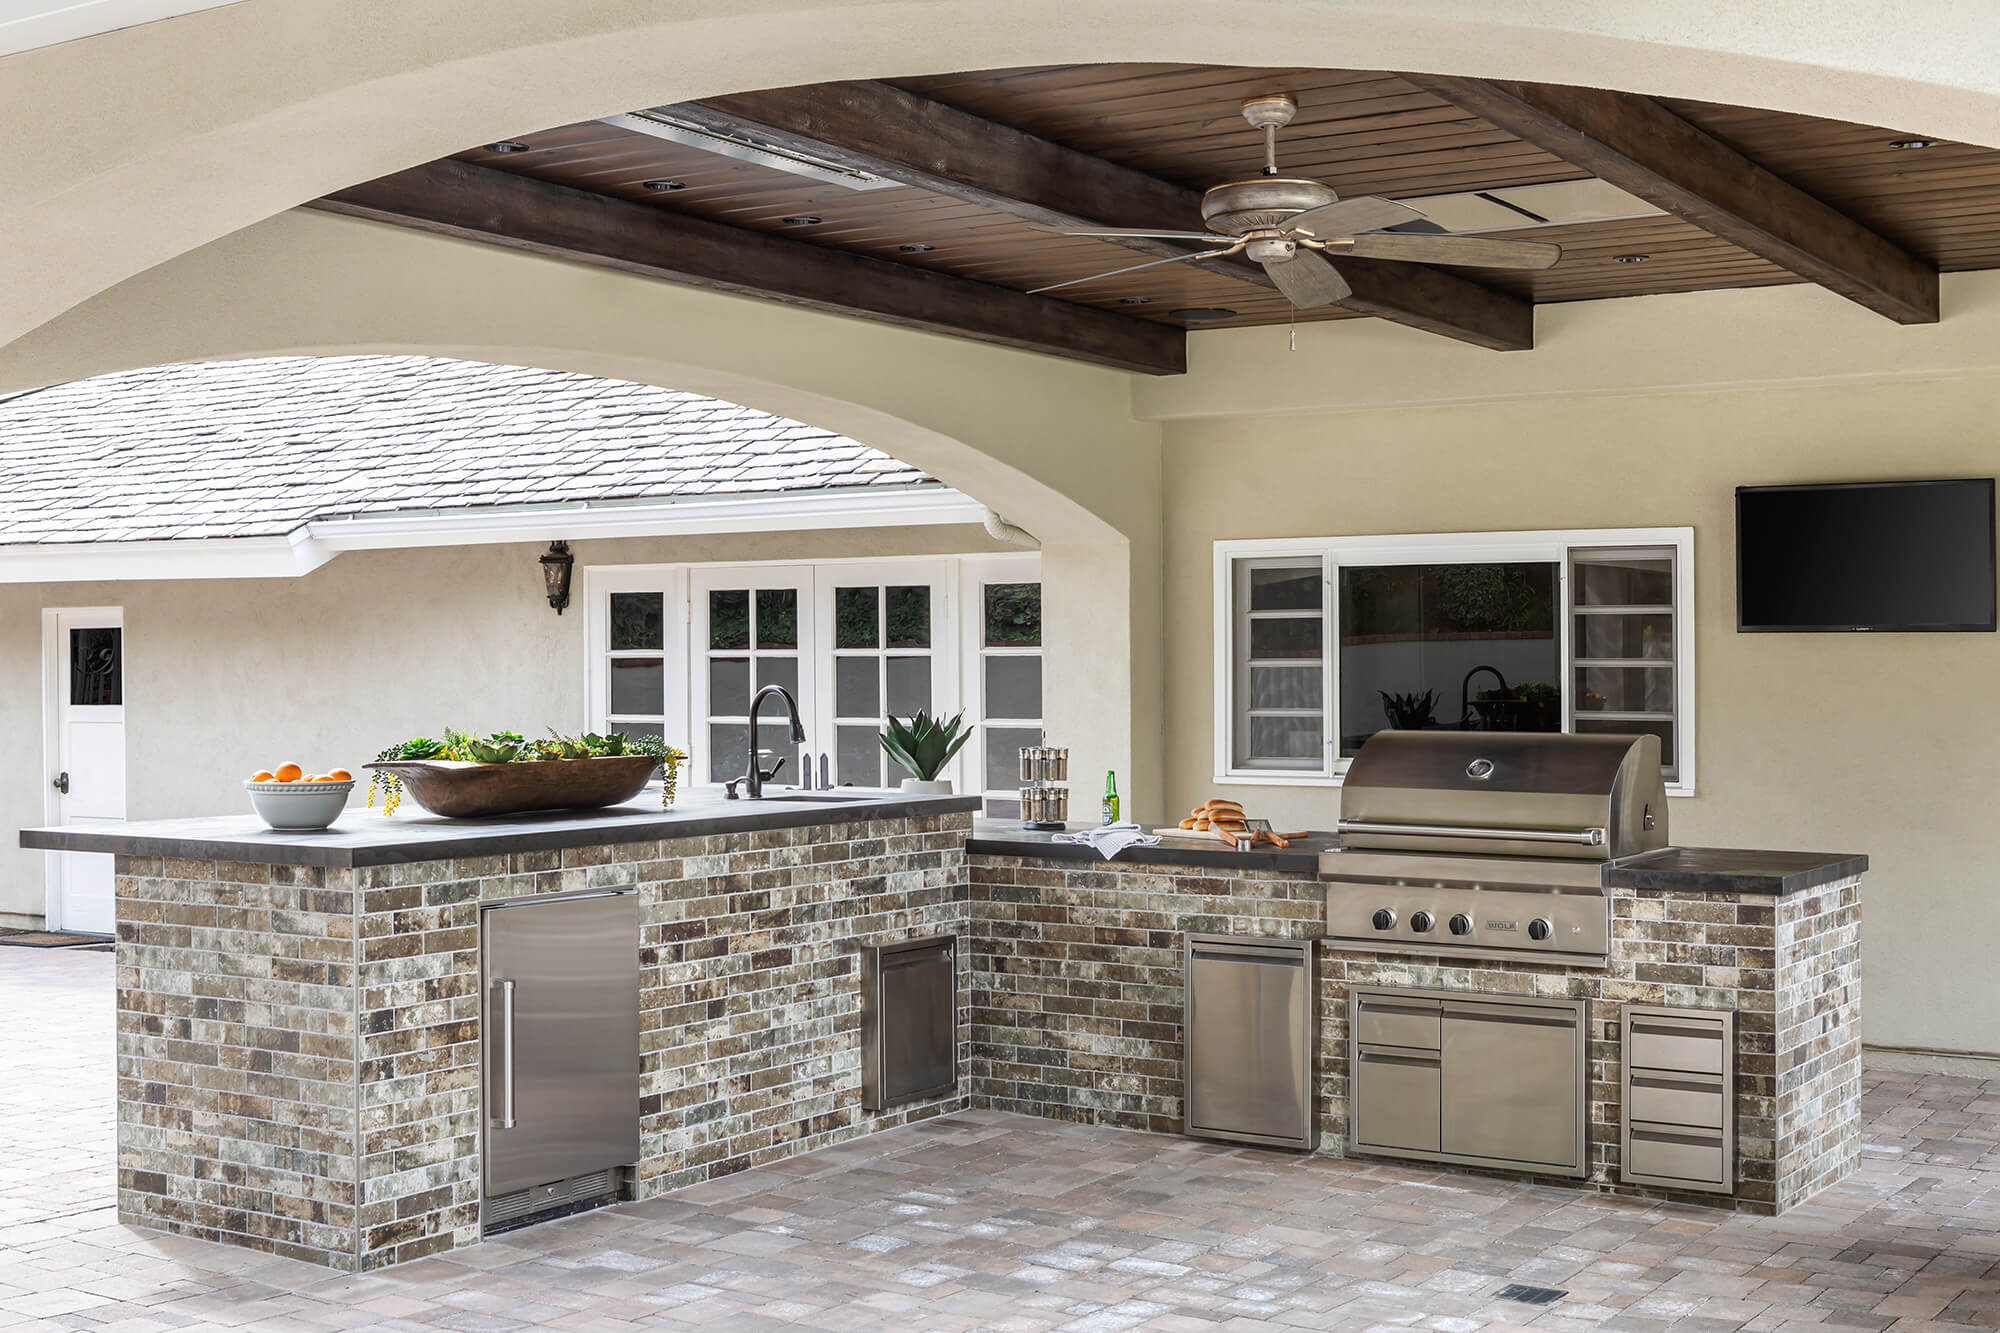 Outdoor Kitchen with built-in barbecue